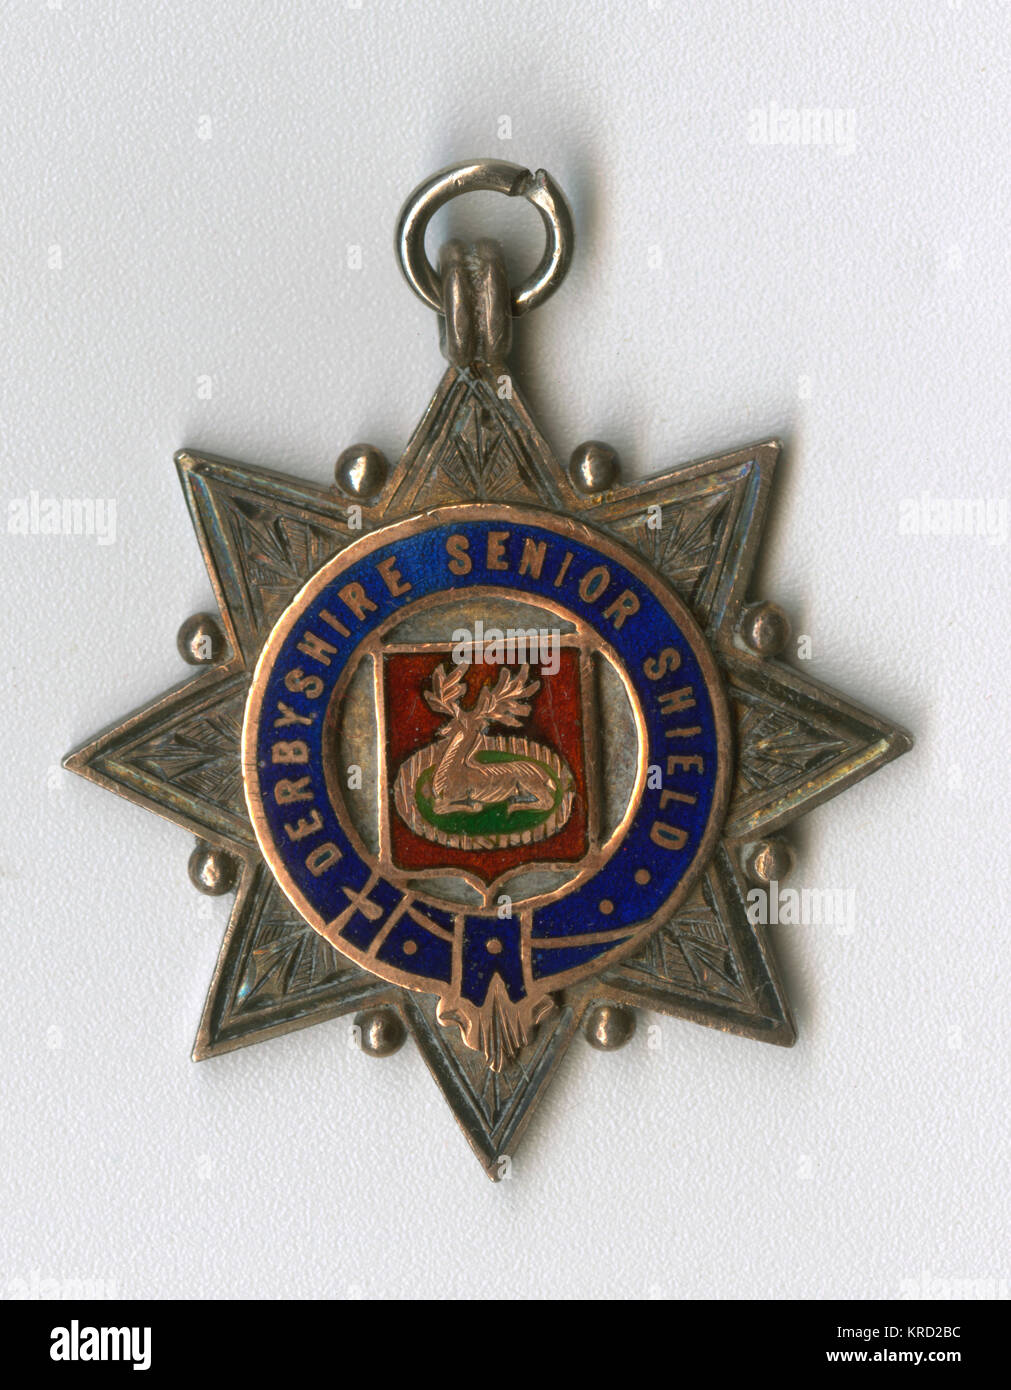 Sports medal of the Derbyshire Senior Shield, awarded to the runners up in the 1908-1909 season.  A star-shaped medal featuring the Derby emblem of a deer in a park at the centre.      Date: 1909 Stock Photo